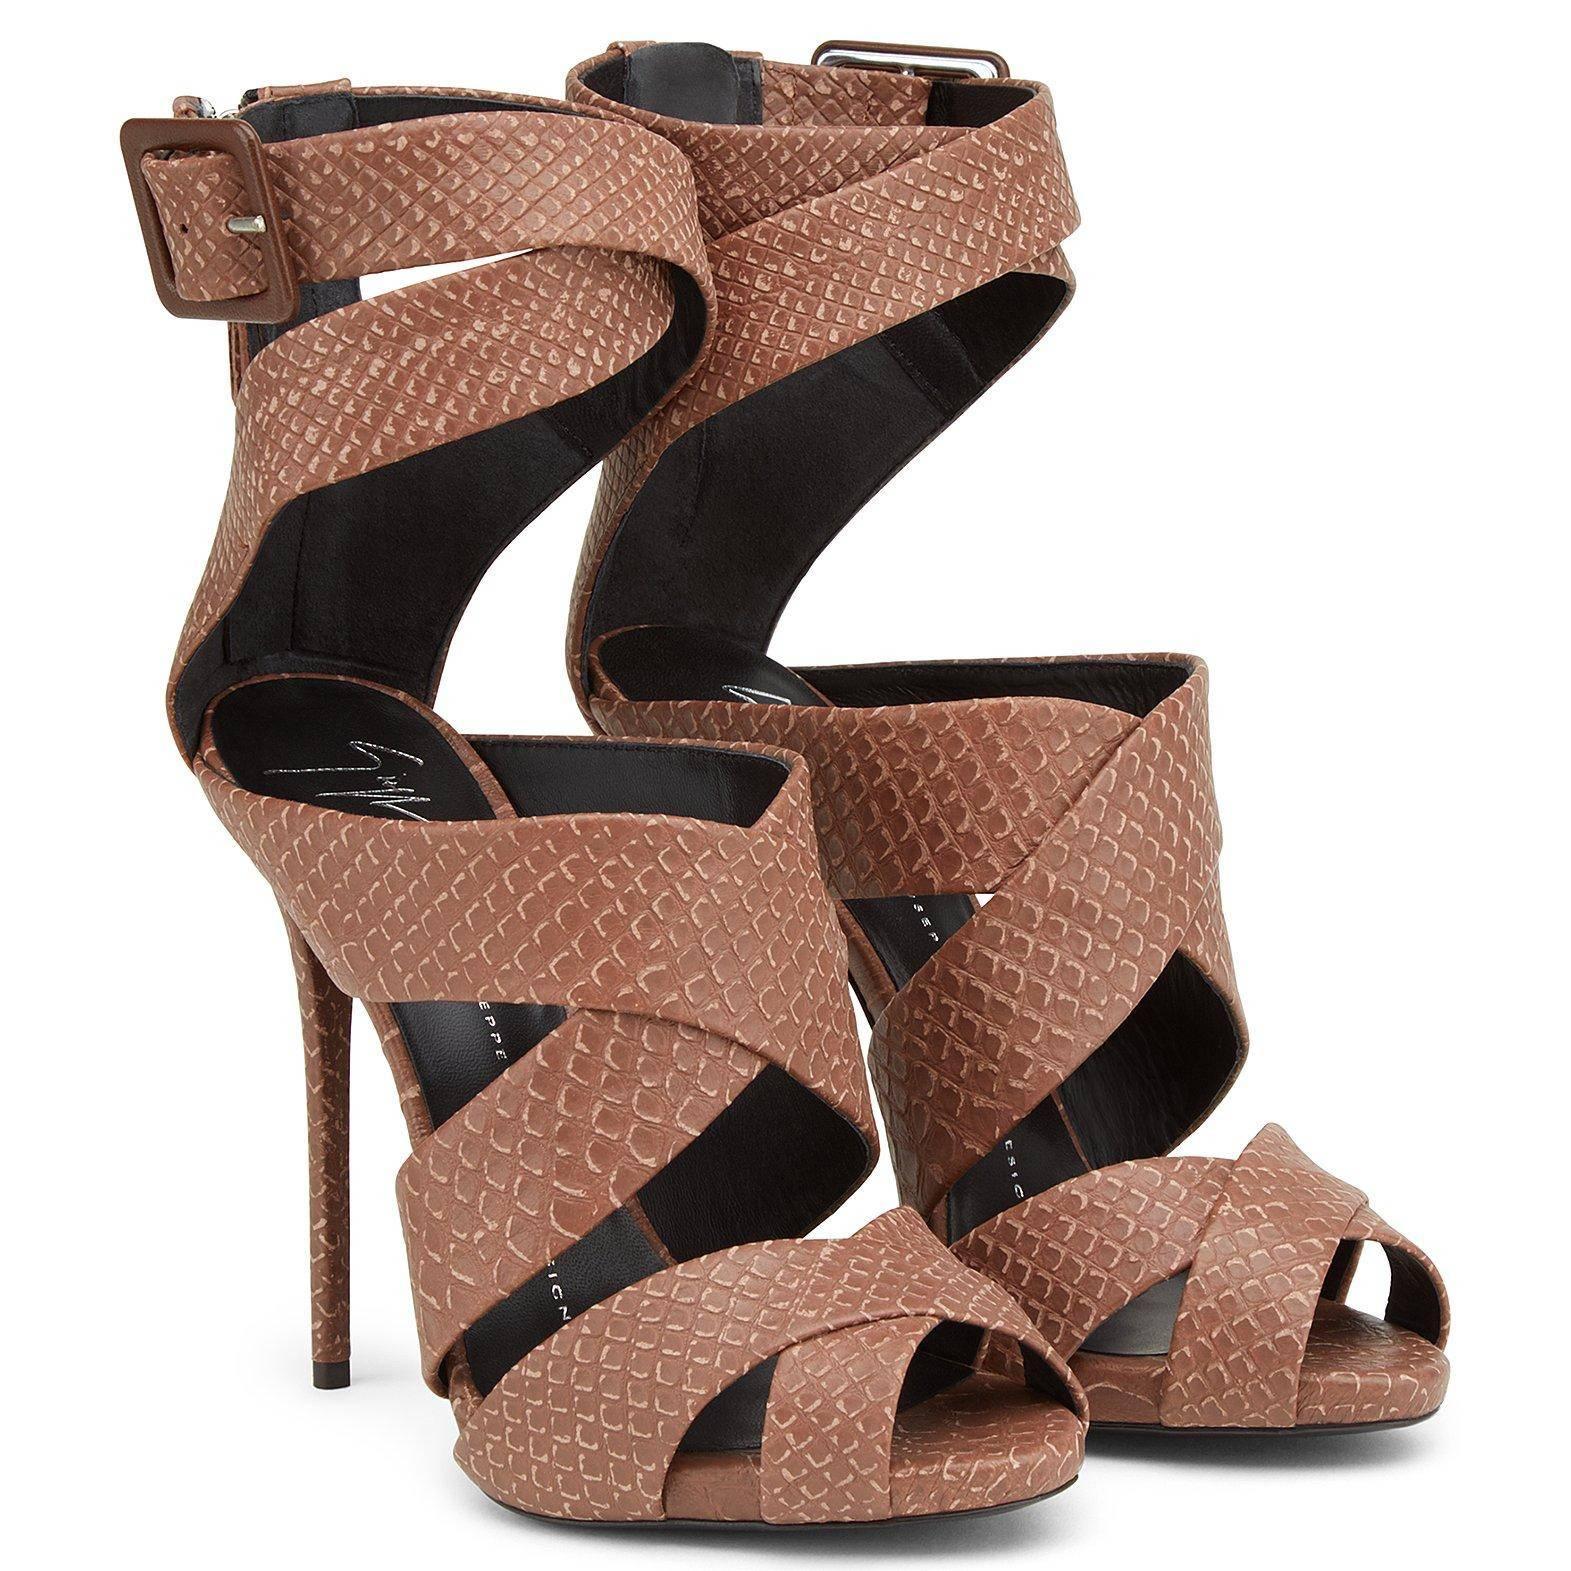 Giuseppe Zanotti New Python Embossed Leather Nude Cognac Strappy Heels in Box

Size IT 36
Python embossed
Leather
Made in Italy
Buckle and zipper closure
Heel height 4.75